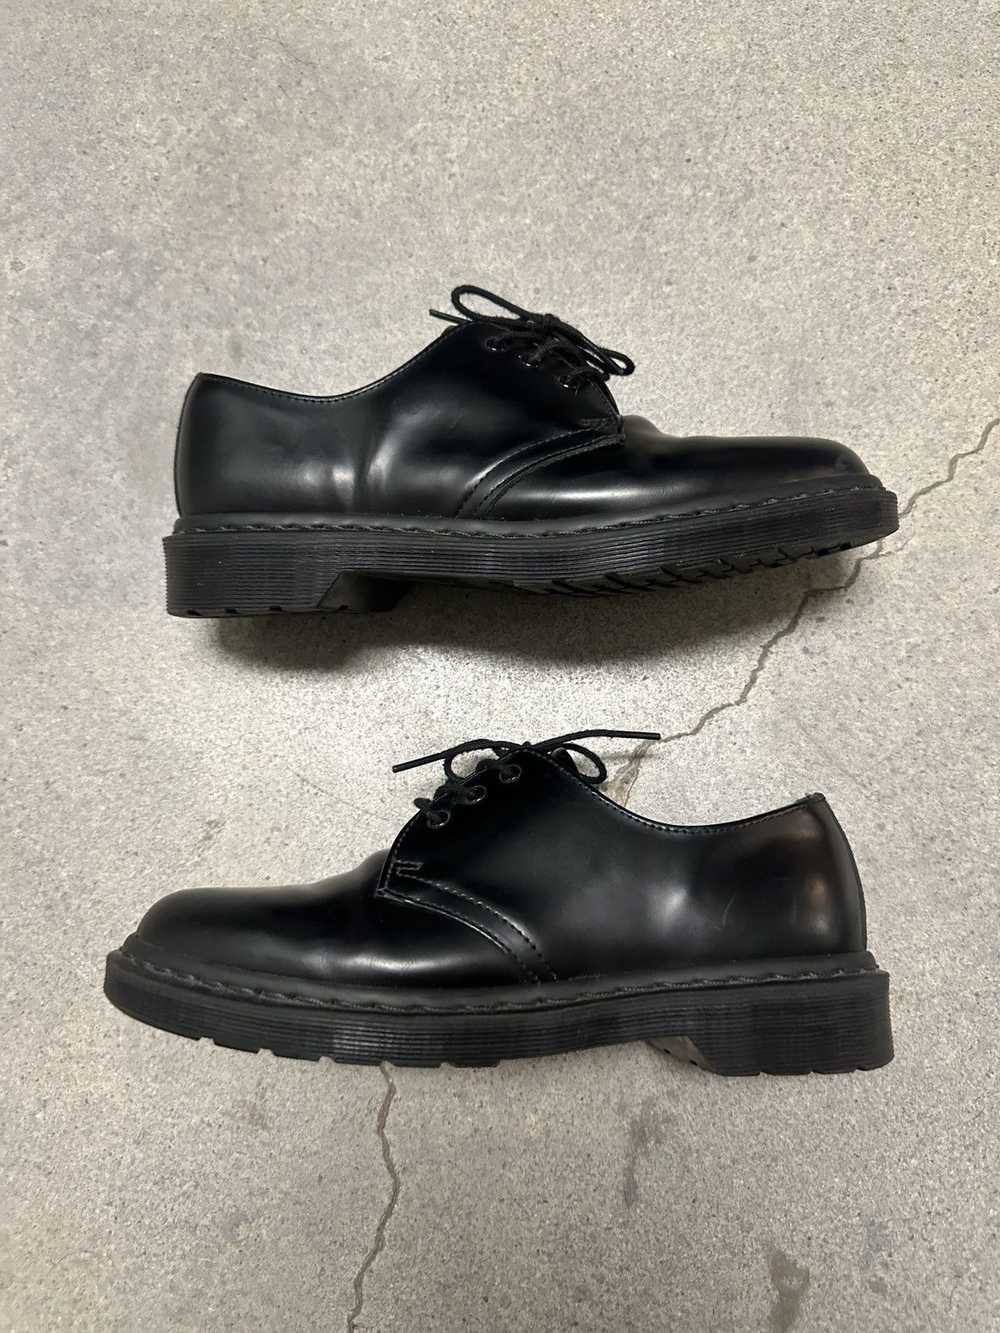 Dr. Martens 1461 Mono Smooth Leather Oxford Size 8 - image 4